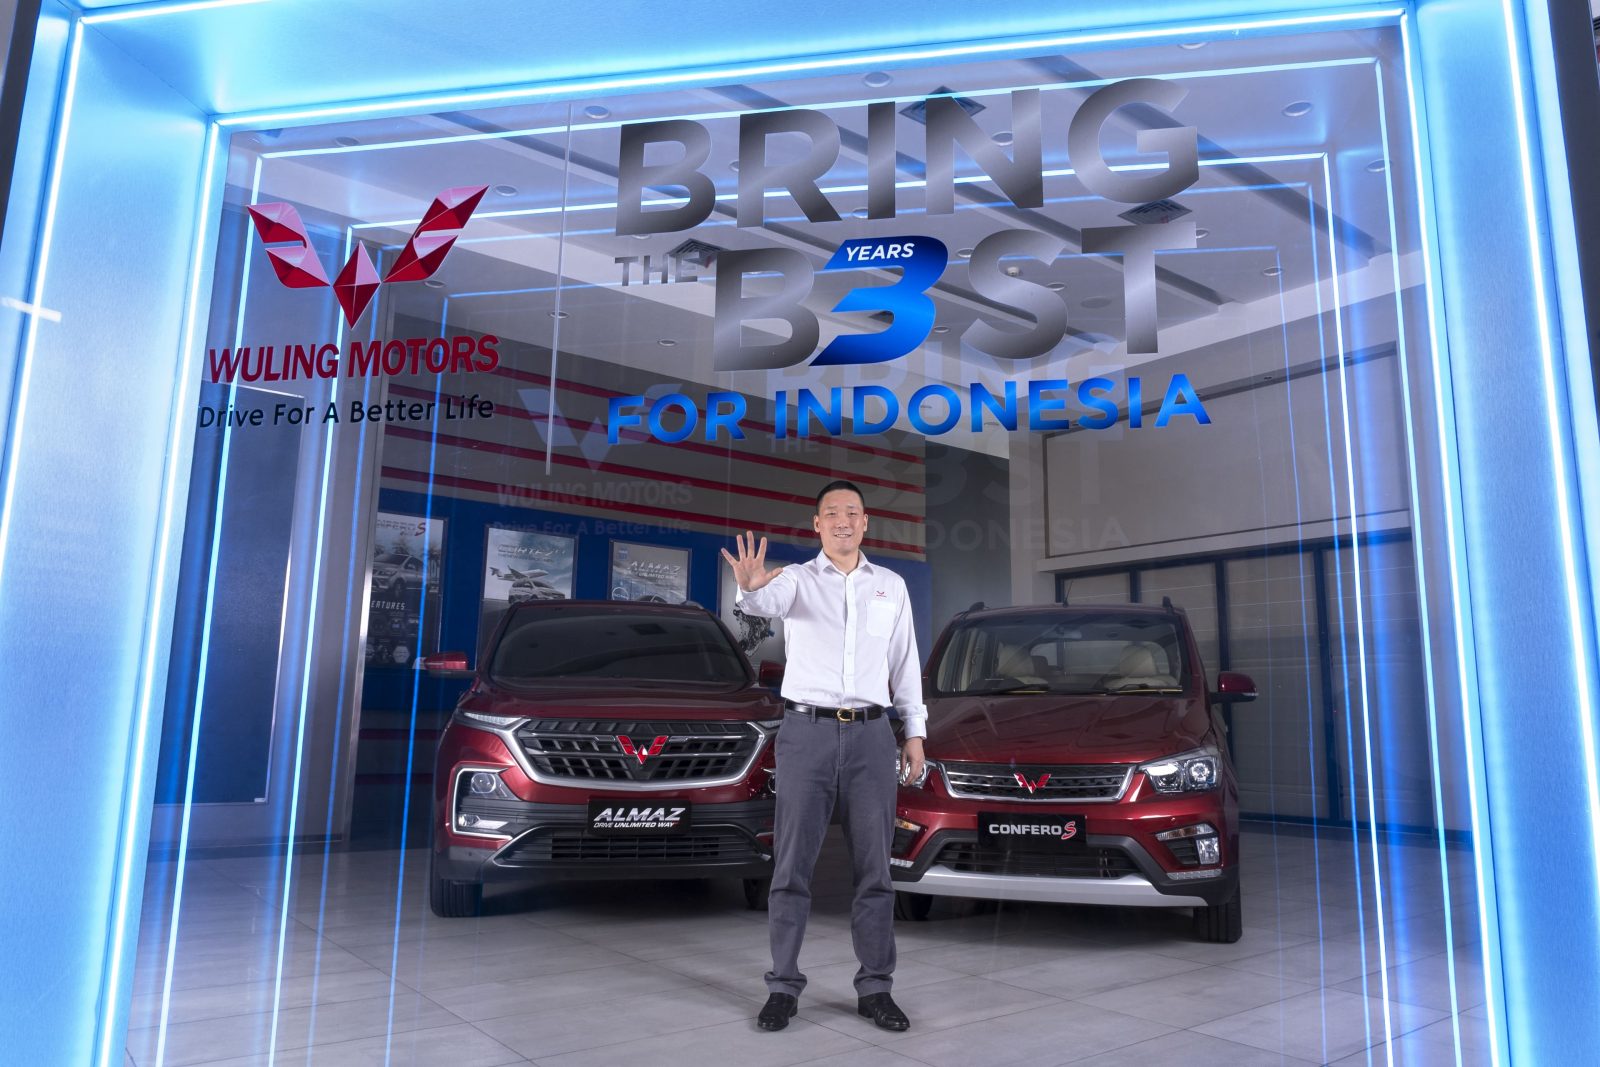 Image Three Years Wuling Motors Moves Together with Indonesia